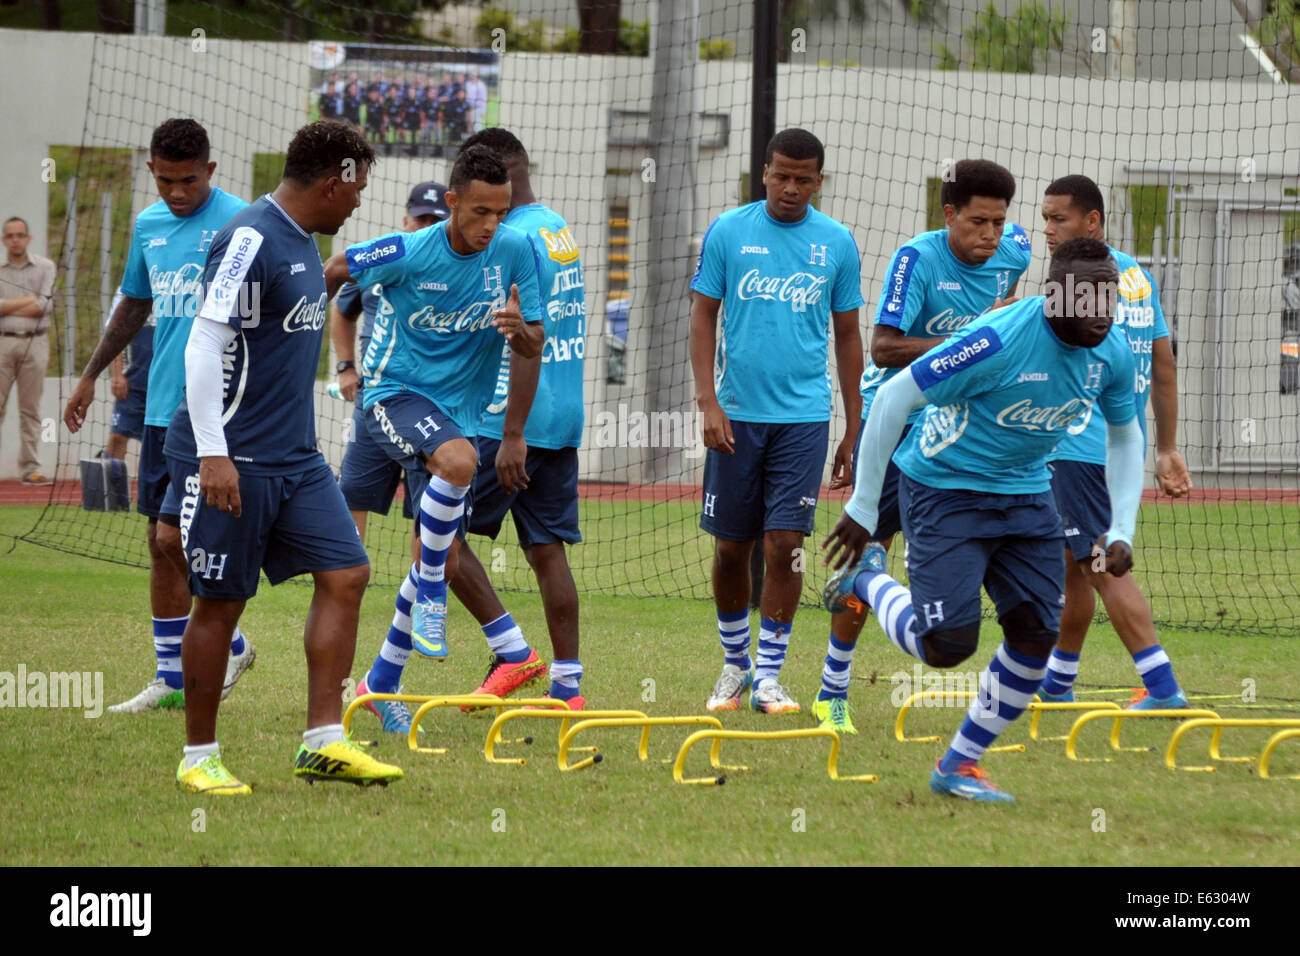 Tegucigalpa, Honduras. 12th Aug, 2014. Honduras' National Team manager Carlos Pavon Plumer (2nd L) directs players during a training session in Tegucigalpa, Honduras, on Aug. 12, 2014. The National Team directed by new manager Carlos Plumer prepared to compete for the Central American Cup that will be held in the United States on Sept 3-13. © Rafael Ochoa/Xinhua/Alamy Live News Stock Photo